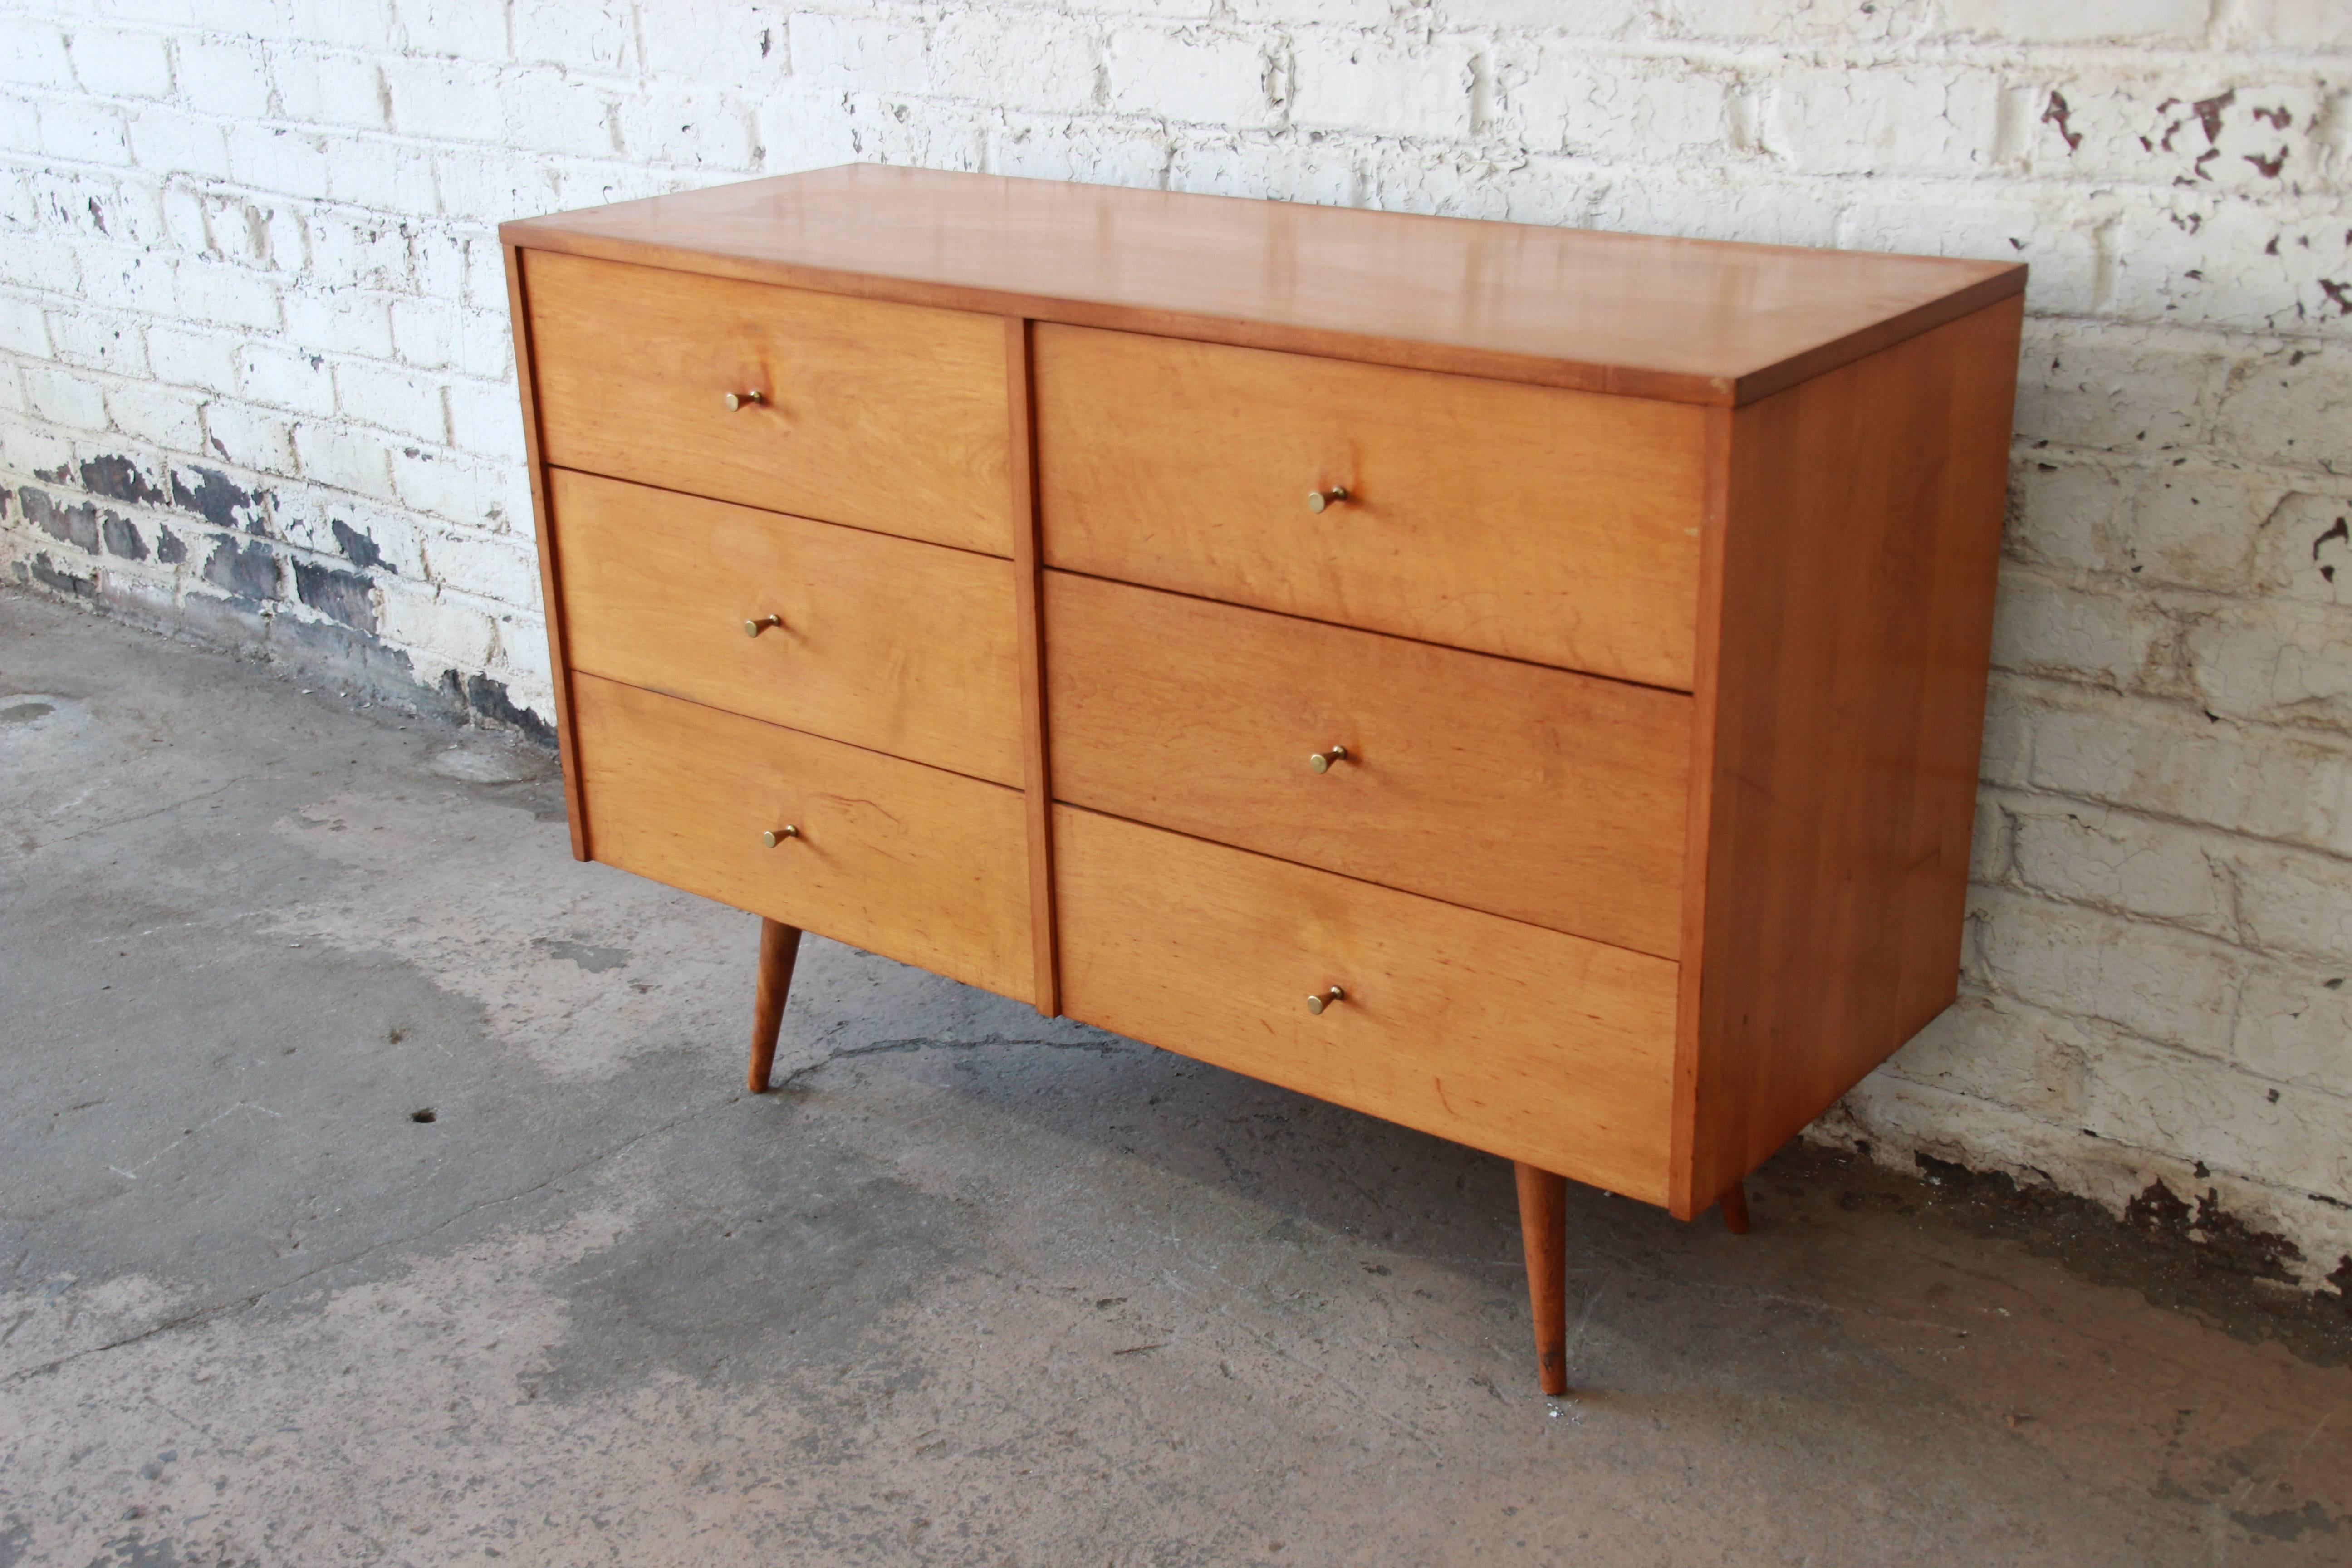 A beautiful original Paul McCobb six-drawer dresser. The dresser features solid birch wood construction and sleek midcentury design. It offers ample room for storage, with six deep drawers. This iconic dresser was designed by Paul McCobb for